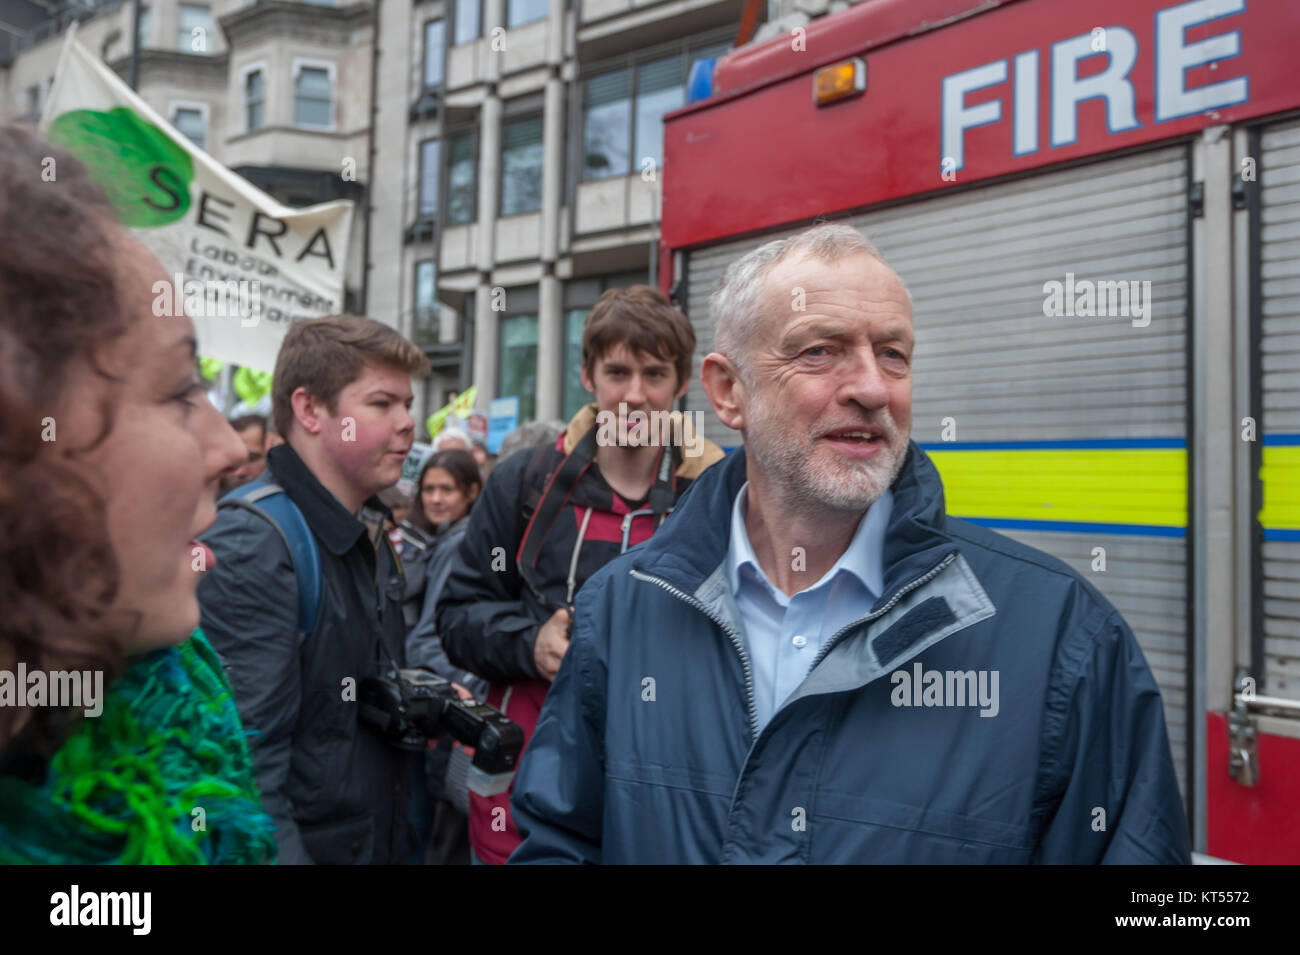 Jeremy Corbyn stands beside the FBU's Fire Engine after making his speech at the start of the People's March for Climate and Jobs. Stock Photo